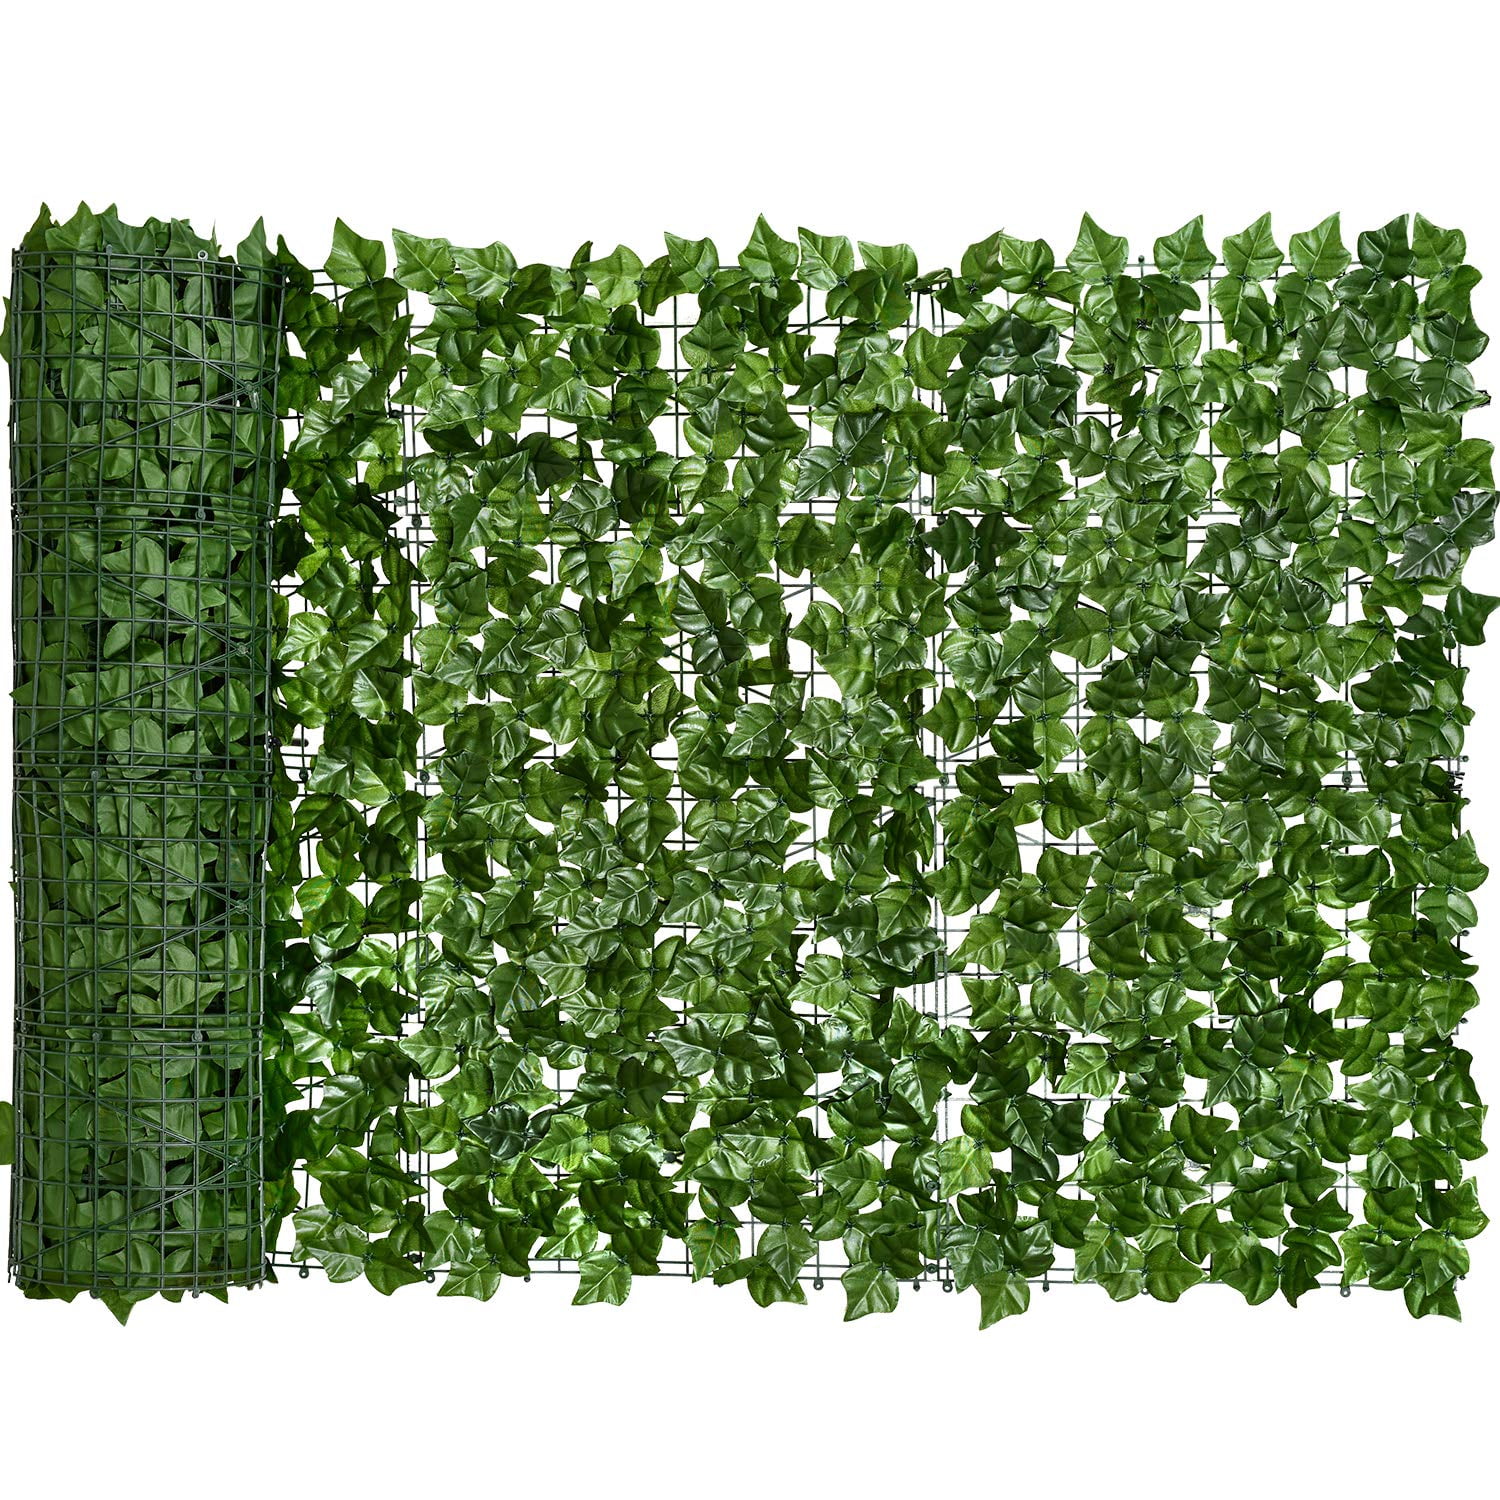 Lingge Artificial Faux Ivy Privacy Fence Screen Artificial Hedges Fence and Faux Ivy Vine Leaf Decorations Fence for Wall Garden Yard Backyard fitting